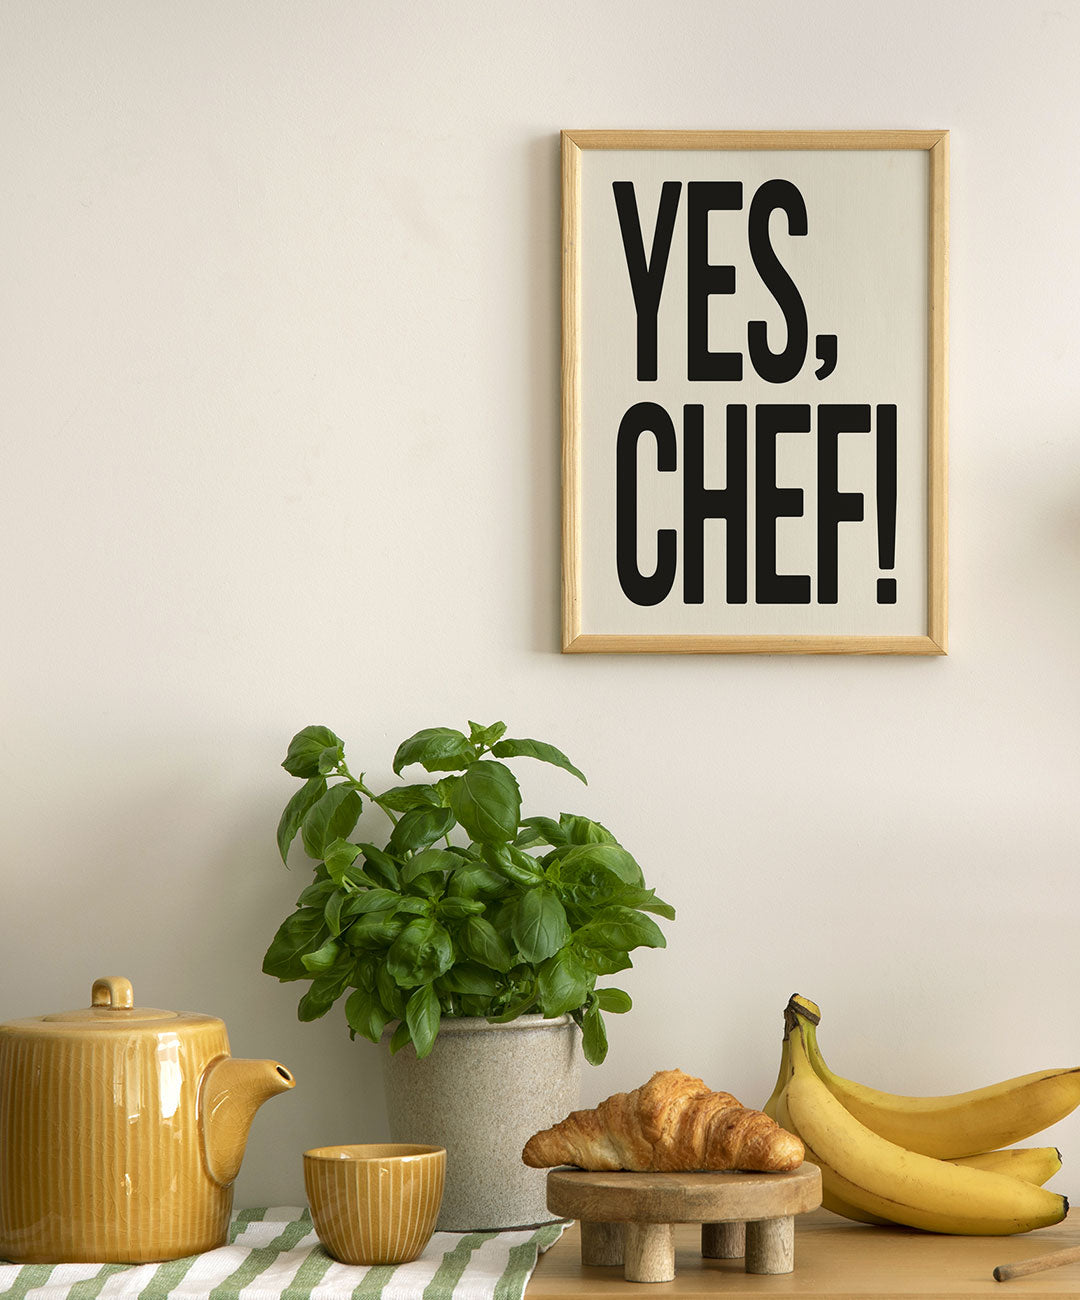 Yes, Chef!